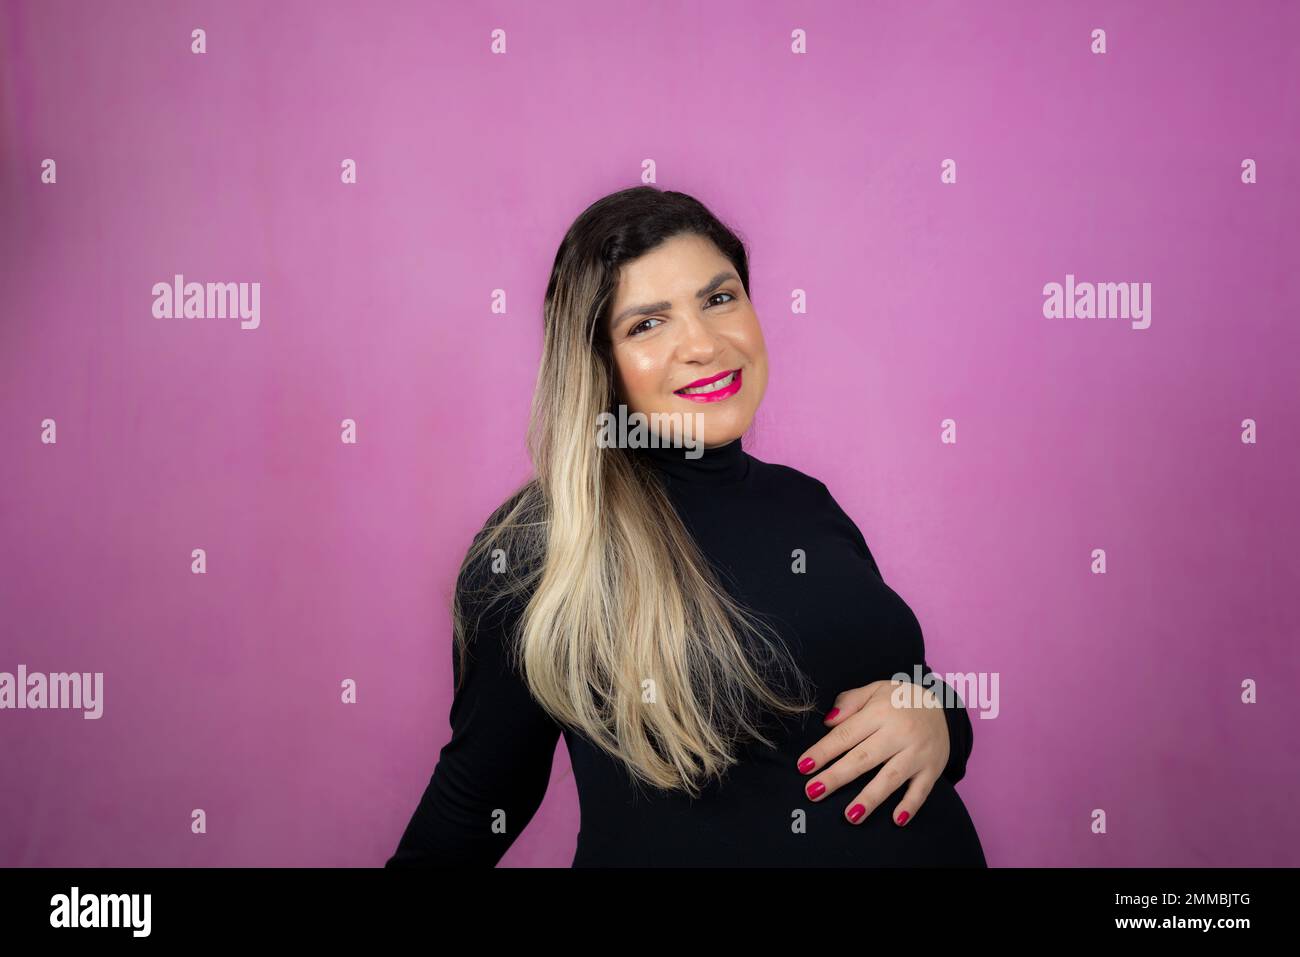 Pregnant woman holding barria with her hands. Isolated against pink background. Stock Photo